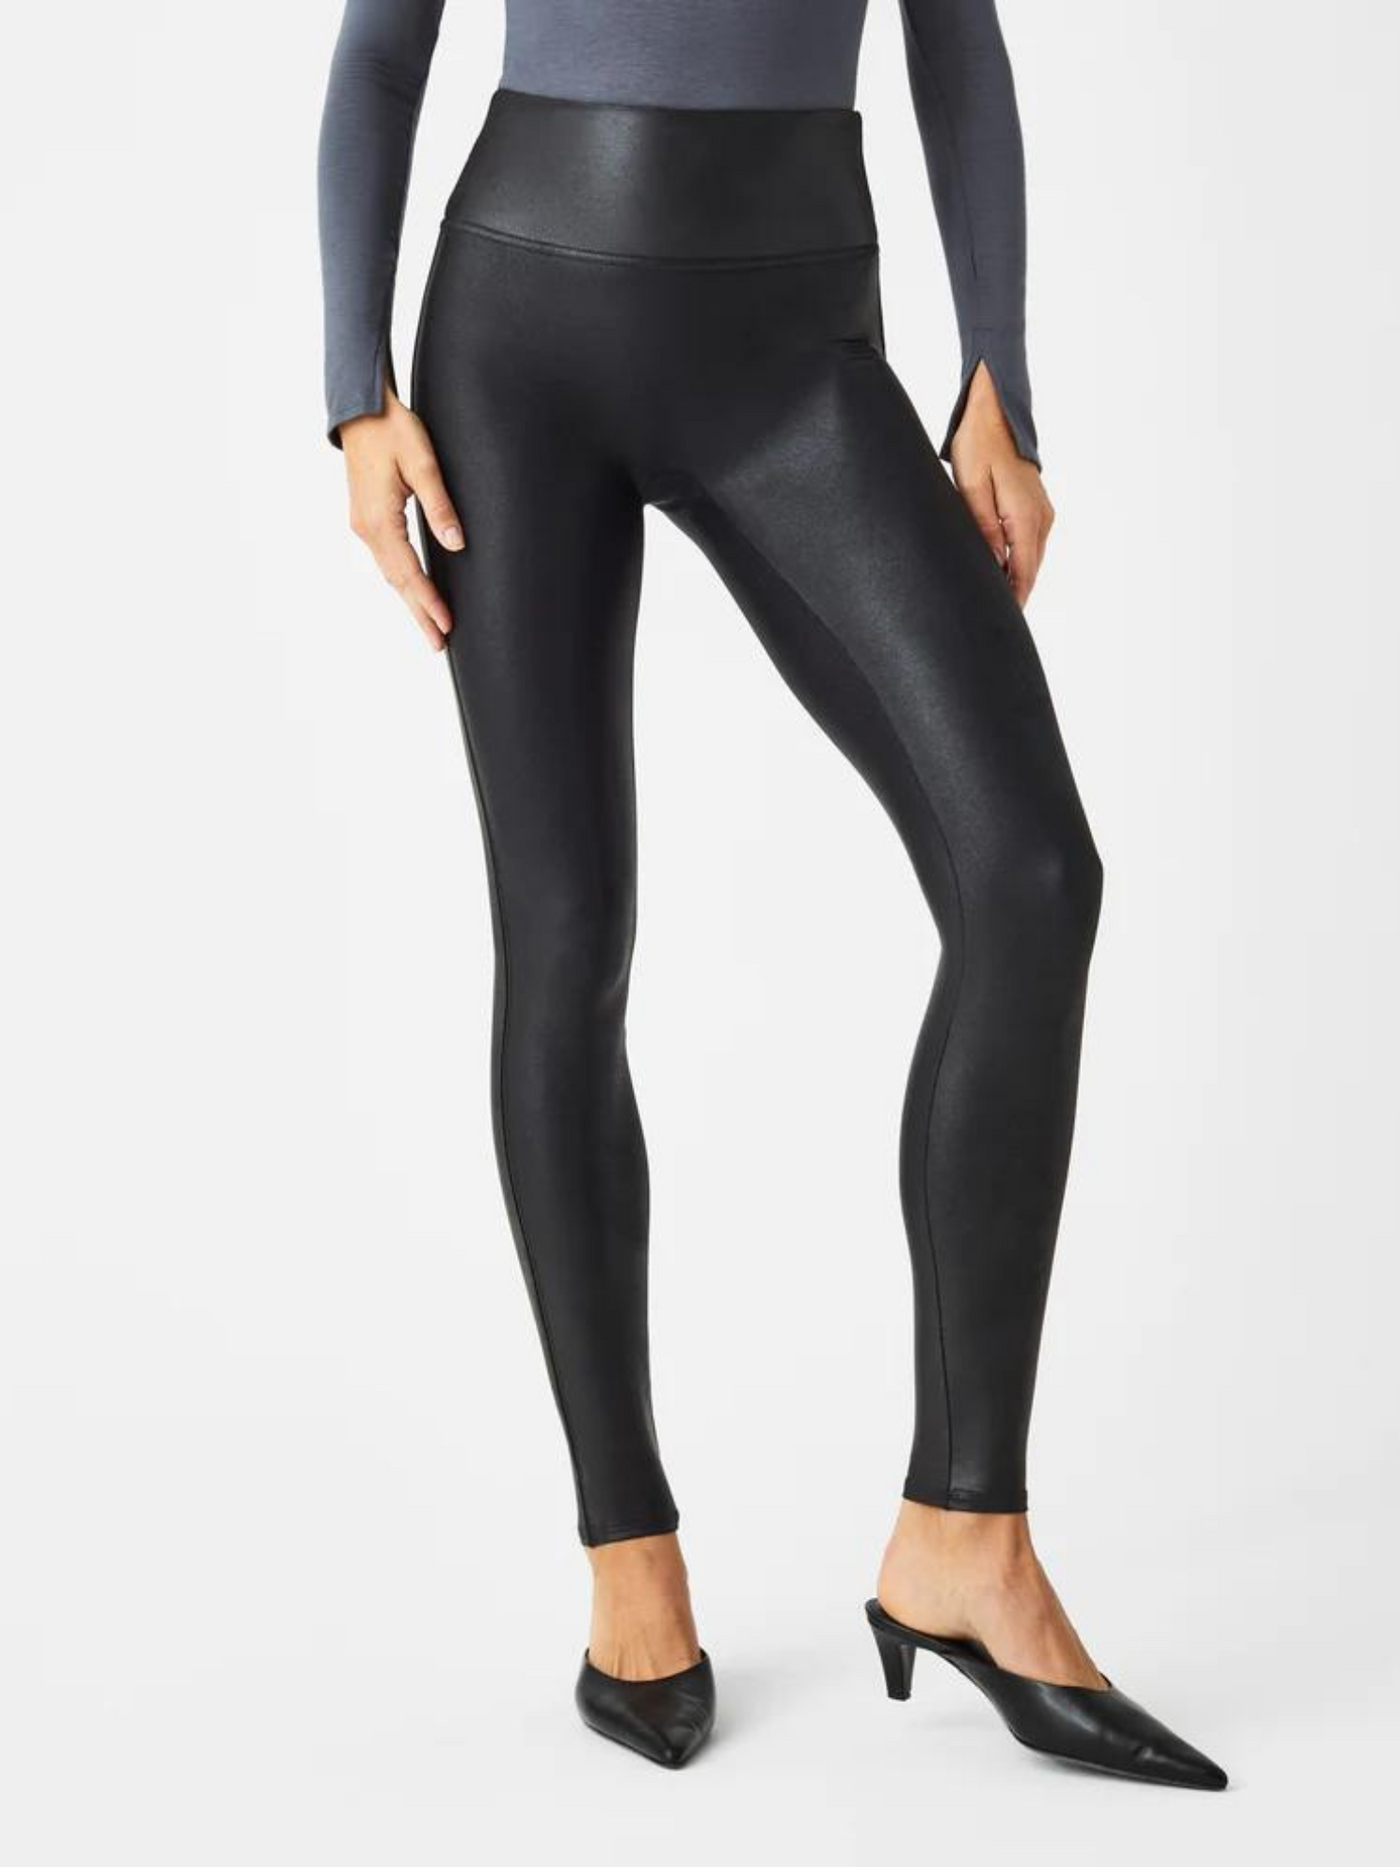 Spanx Black Faux Leather Leggings front view. 